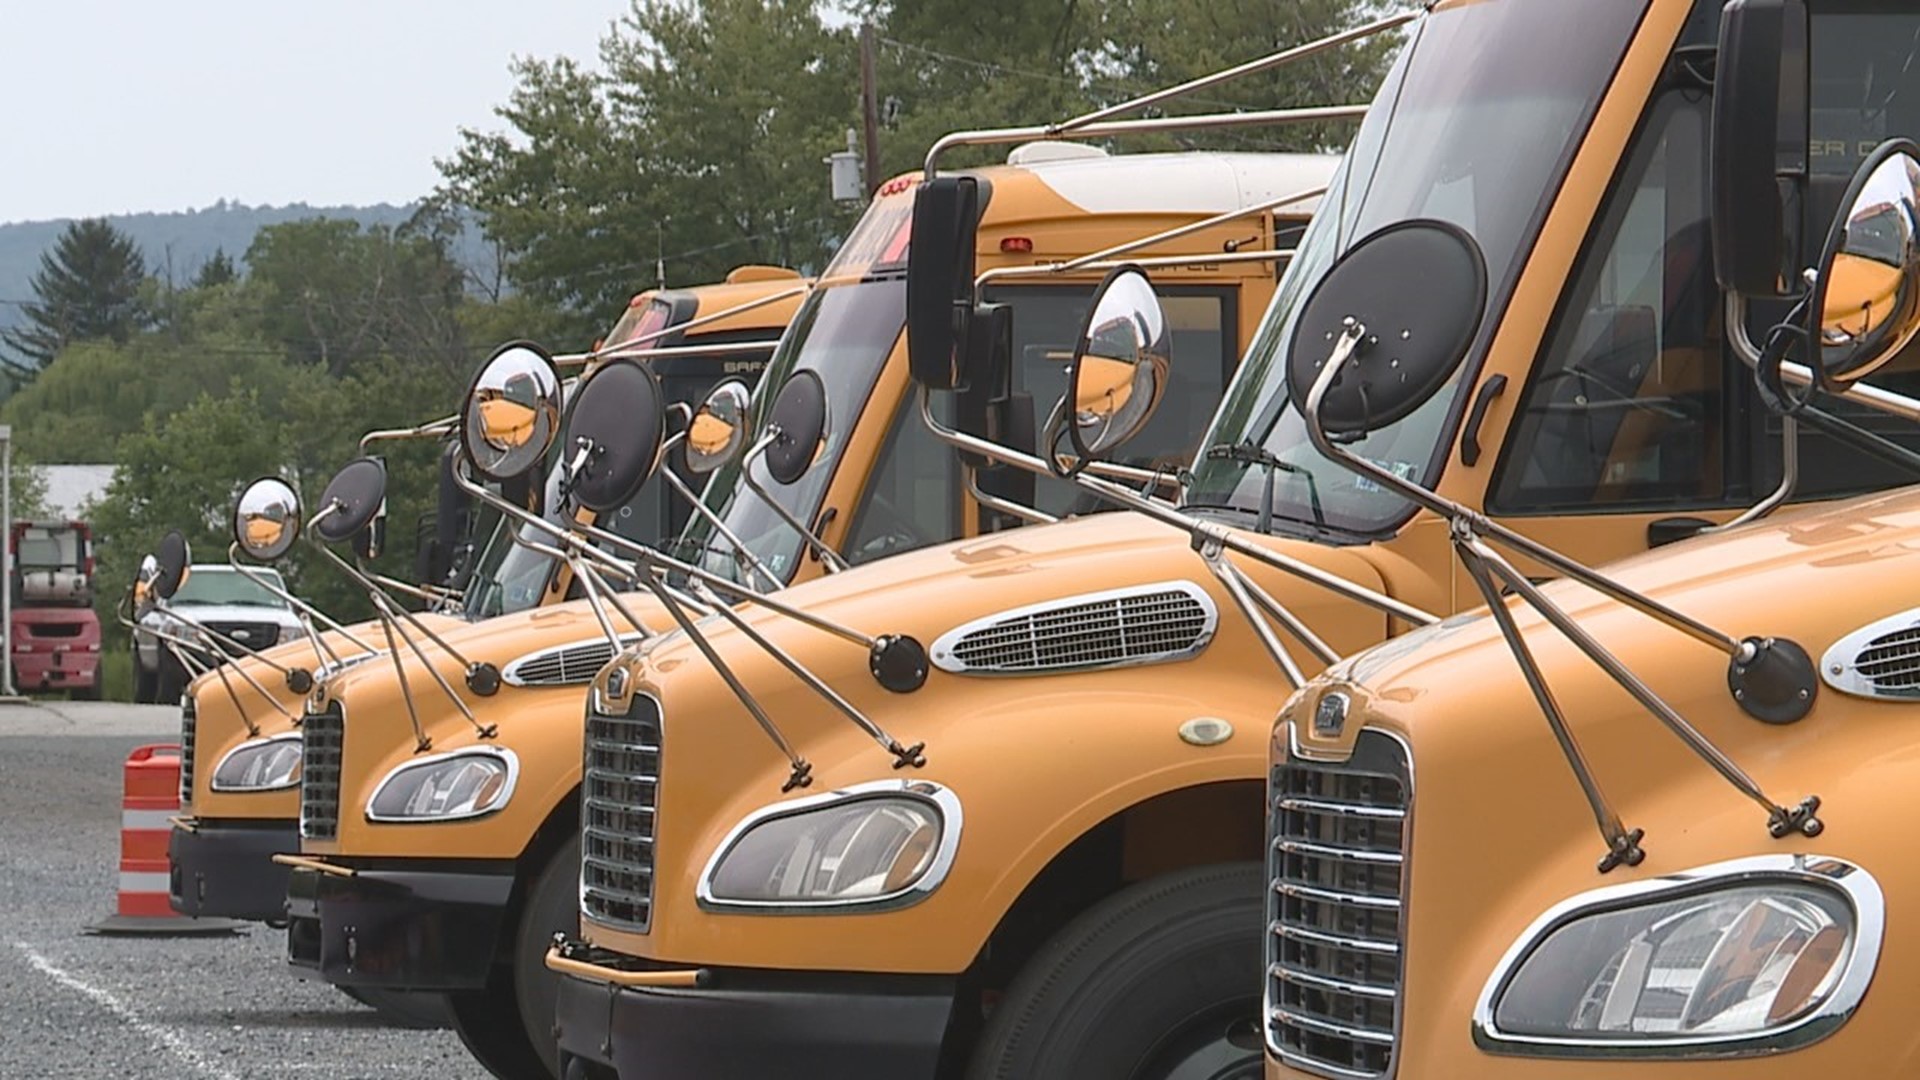 Schools across the country are having a hard time finding bus drivers this year, meaning some students are getting home late in the evening; Pa. is no exception.